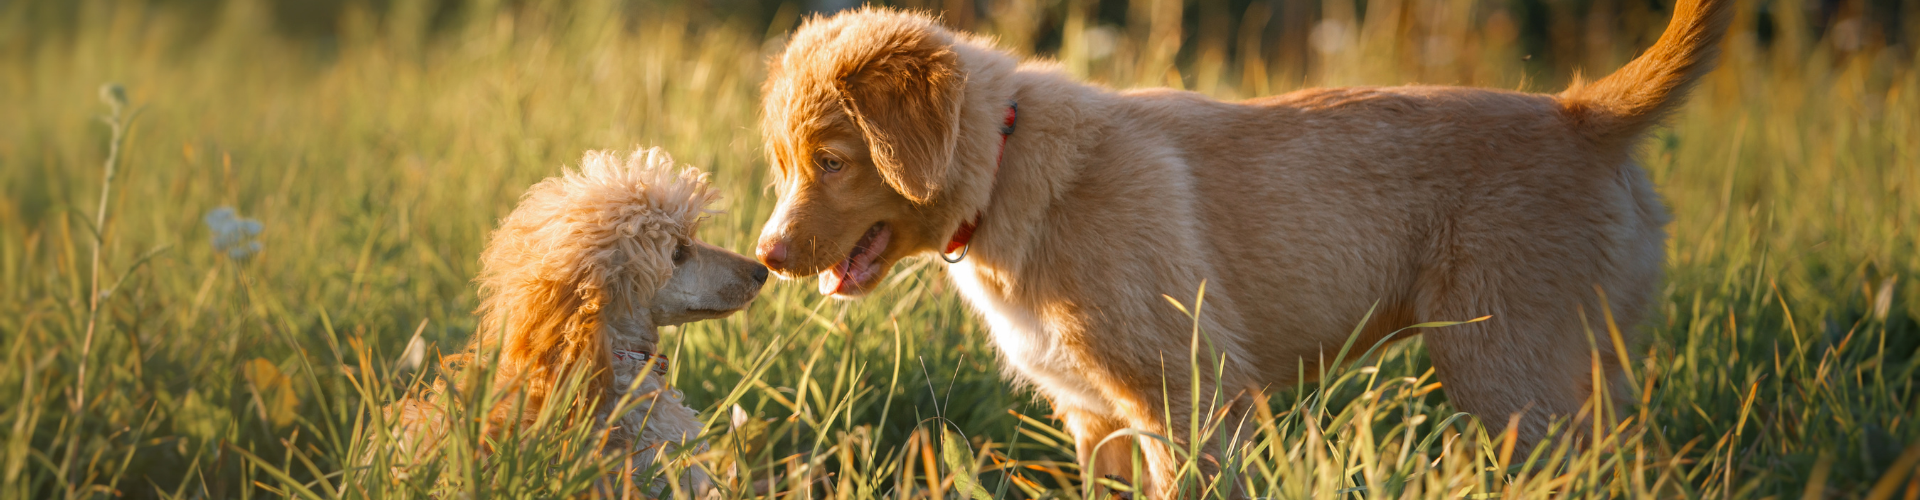 Puppies meeting in a field